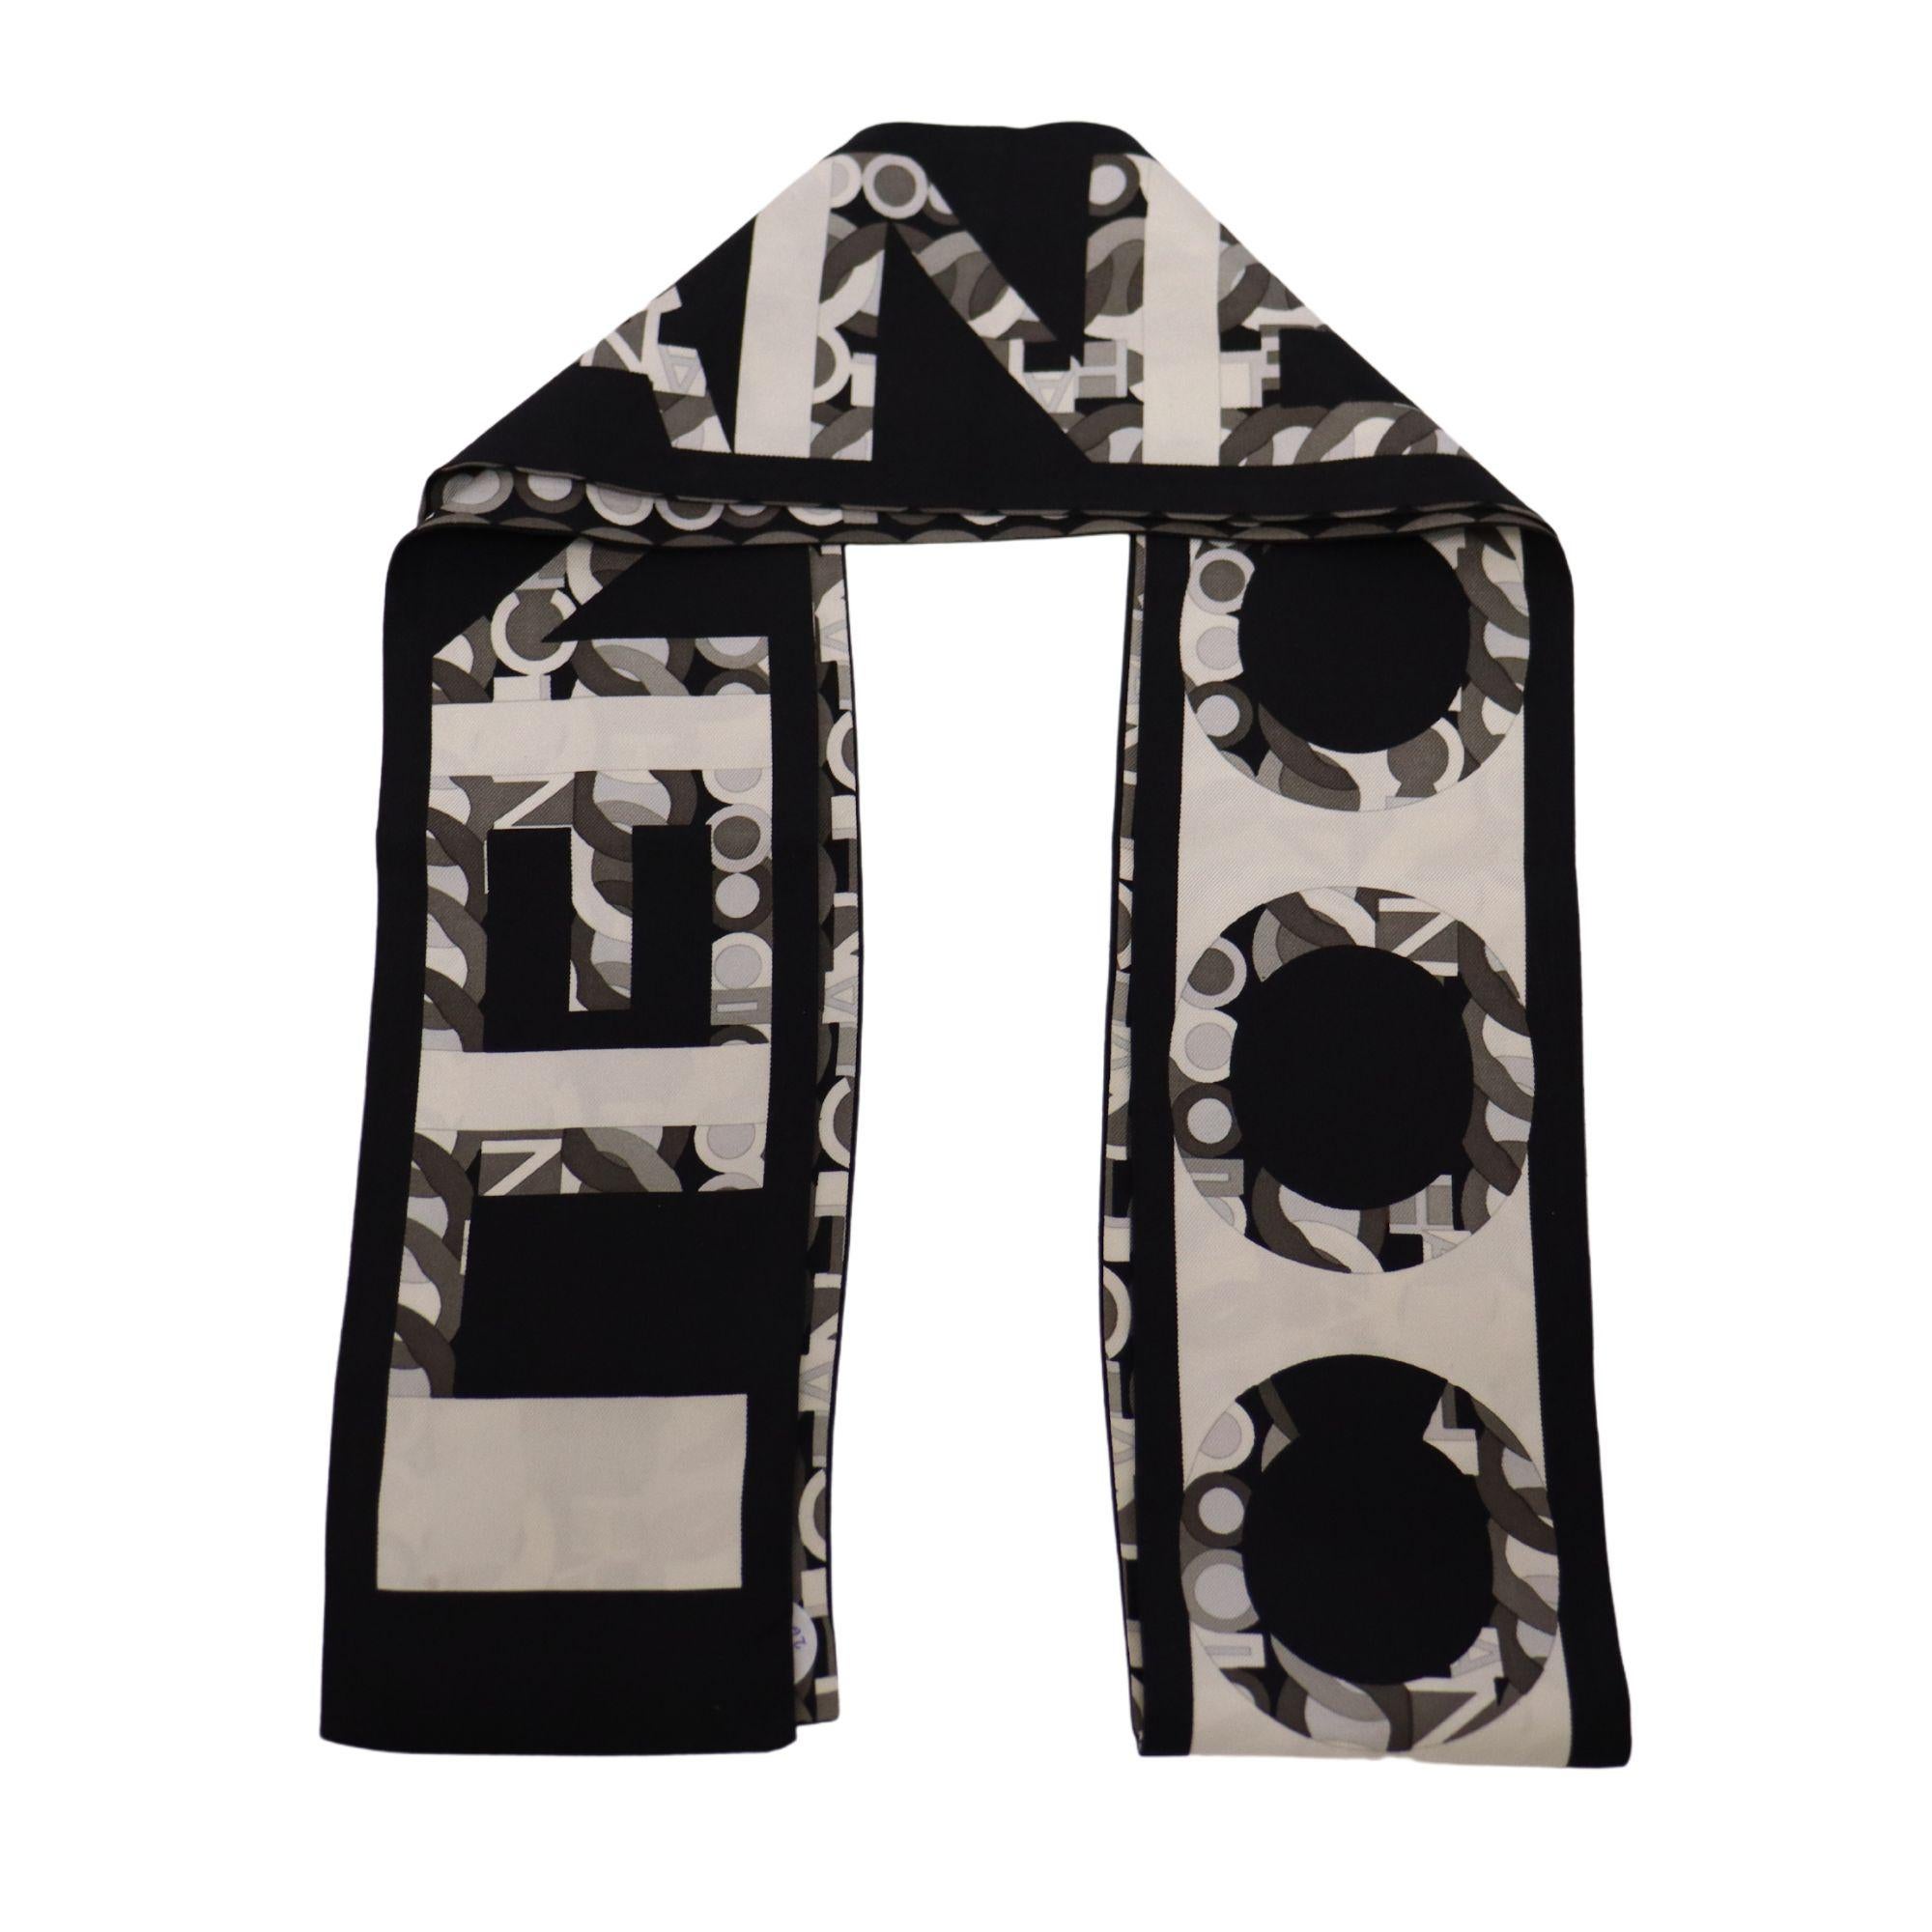 Black and grayscale chain and monogram print Chanel silk scarf. Chanel monogram and 'Chanel' letter grayscale print on the other side. 

Measurements:
9.5cmx155cm